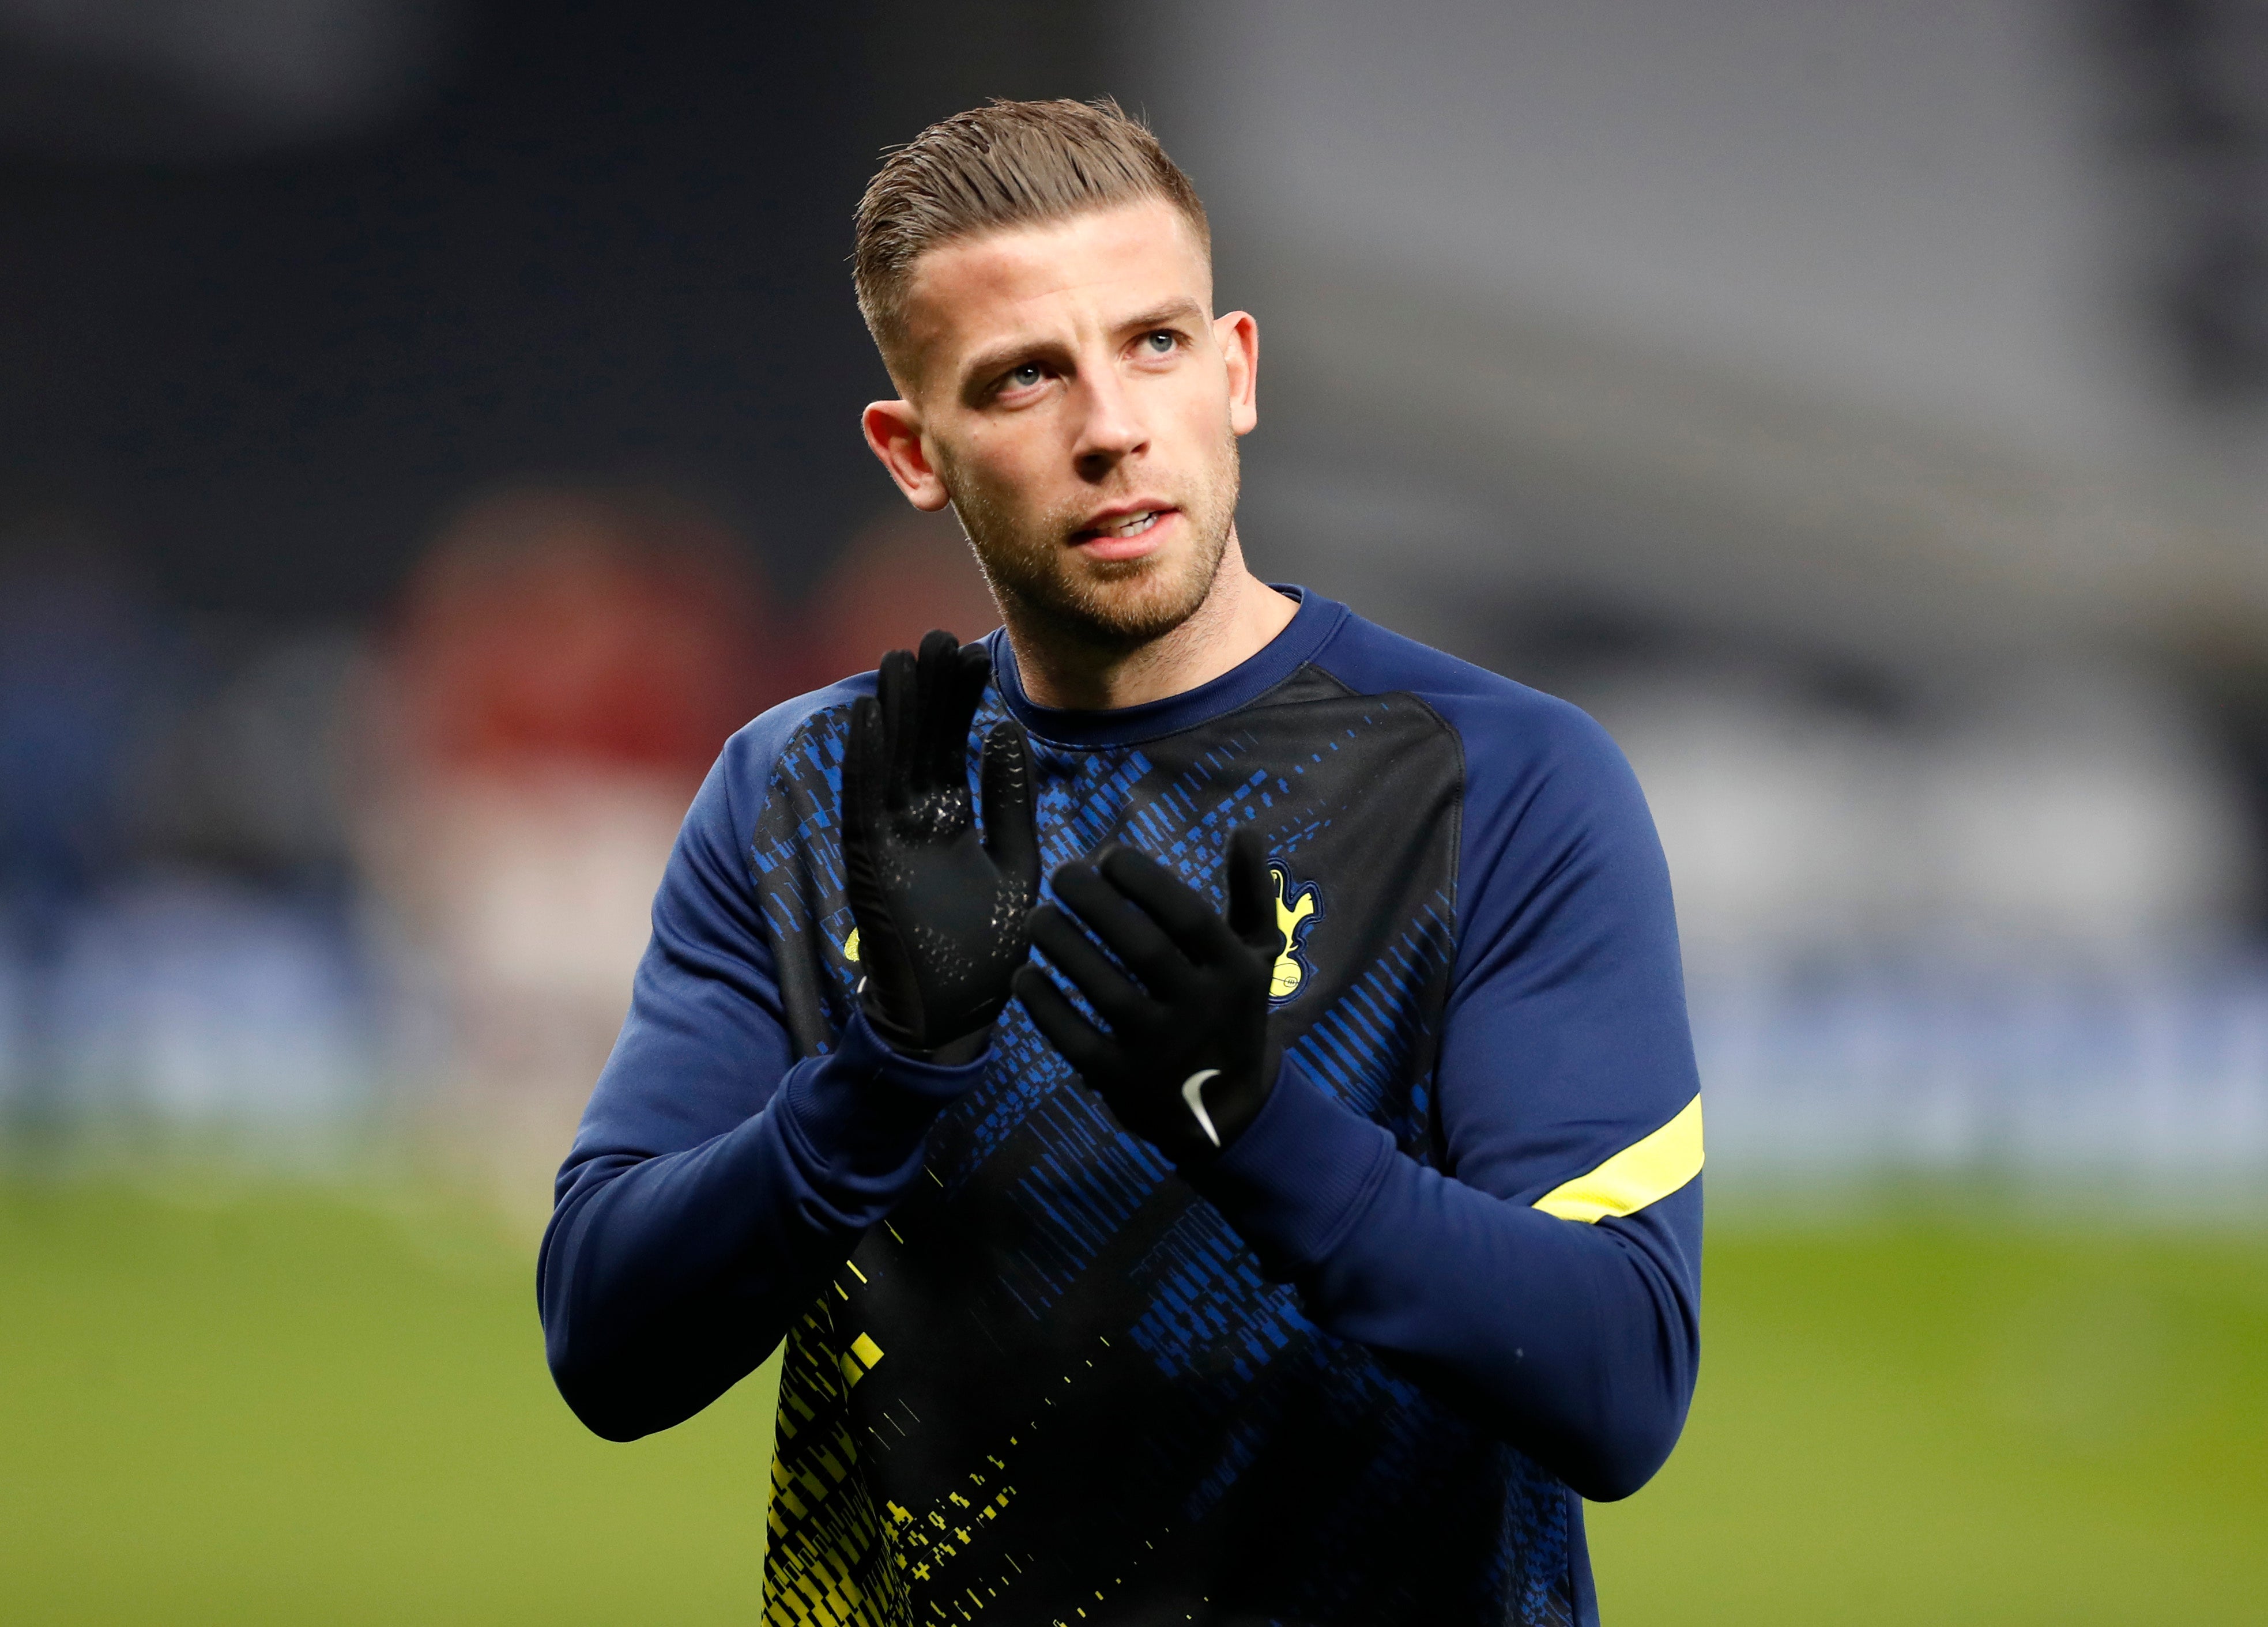 Toby Alderweireld left Tottenham this summer after six seasons at the club